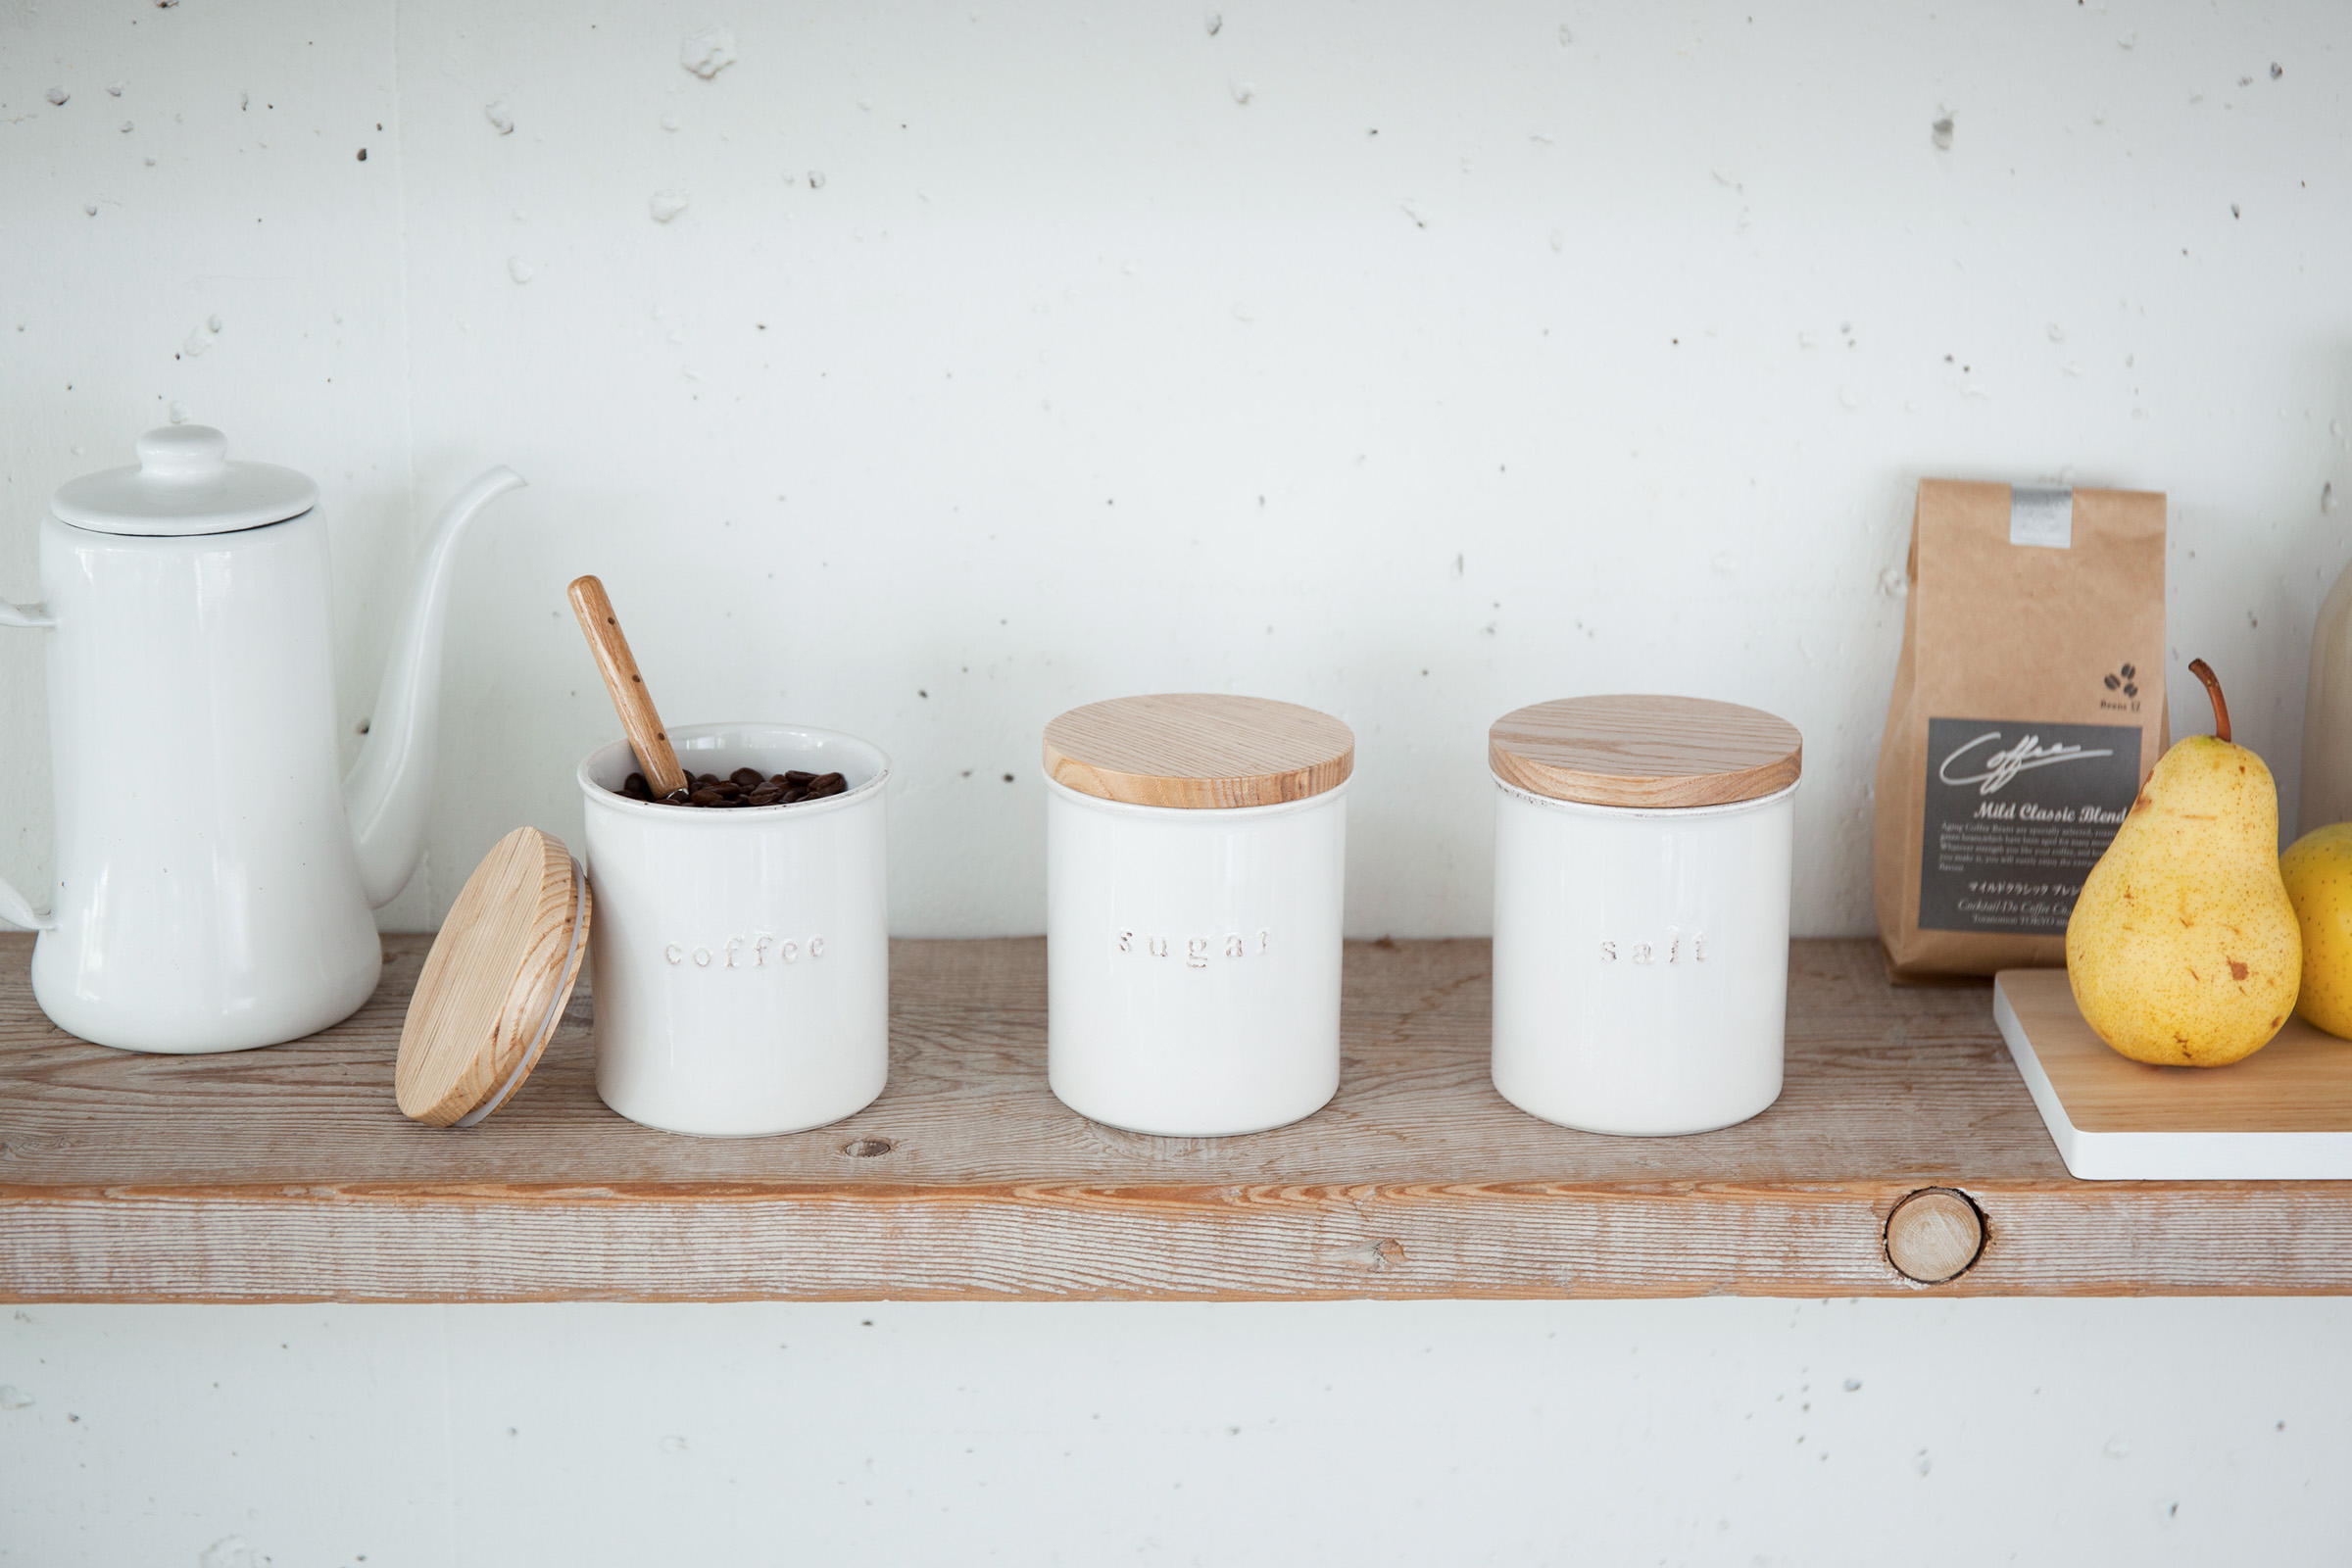 Wooden shelf with three white ceramic containers with wooden-lids.